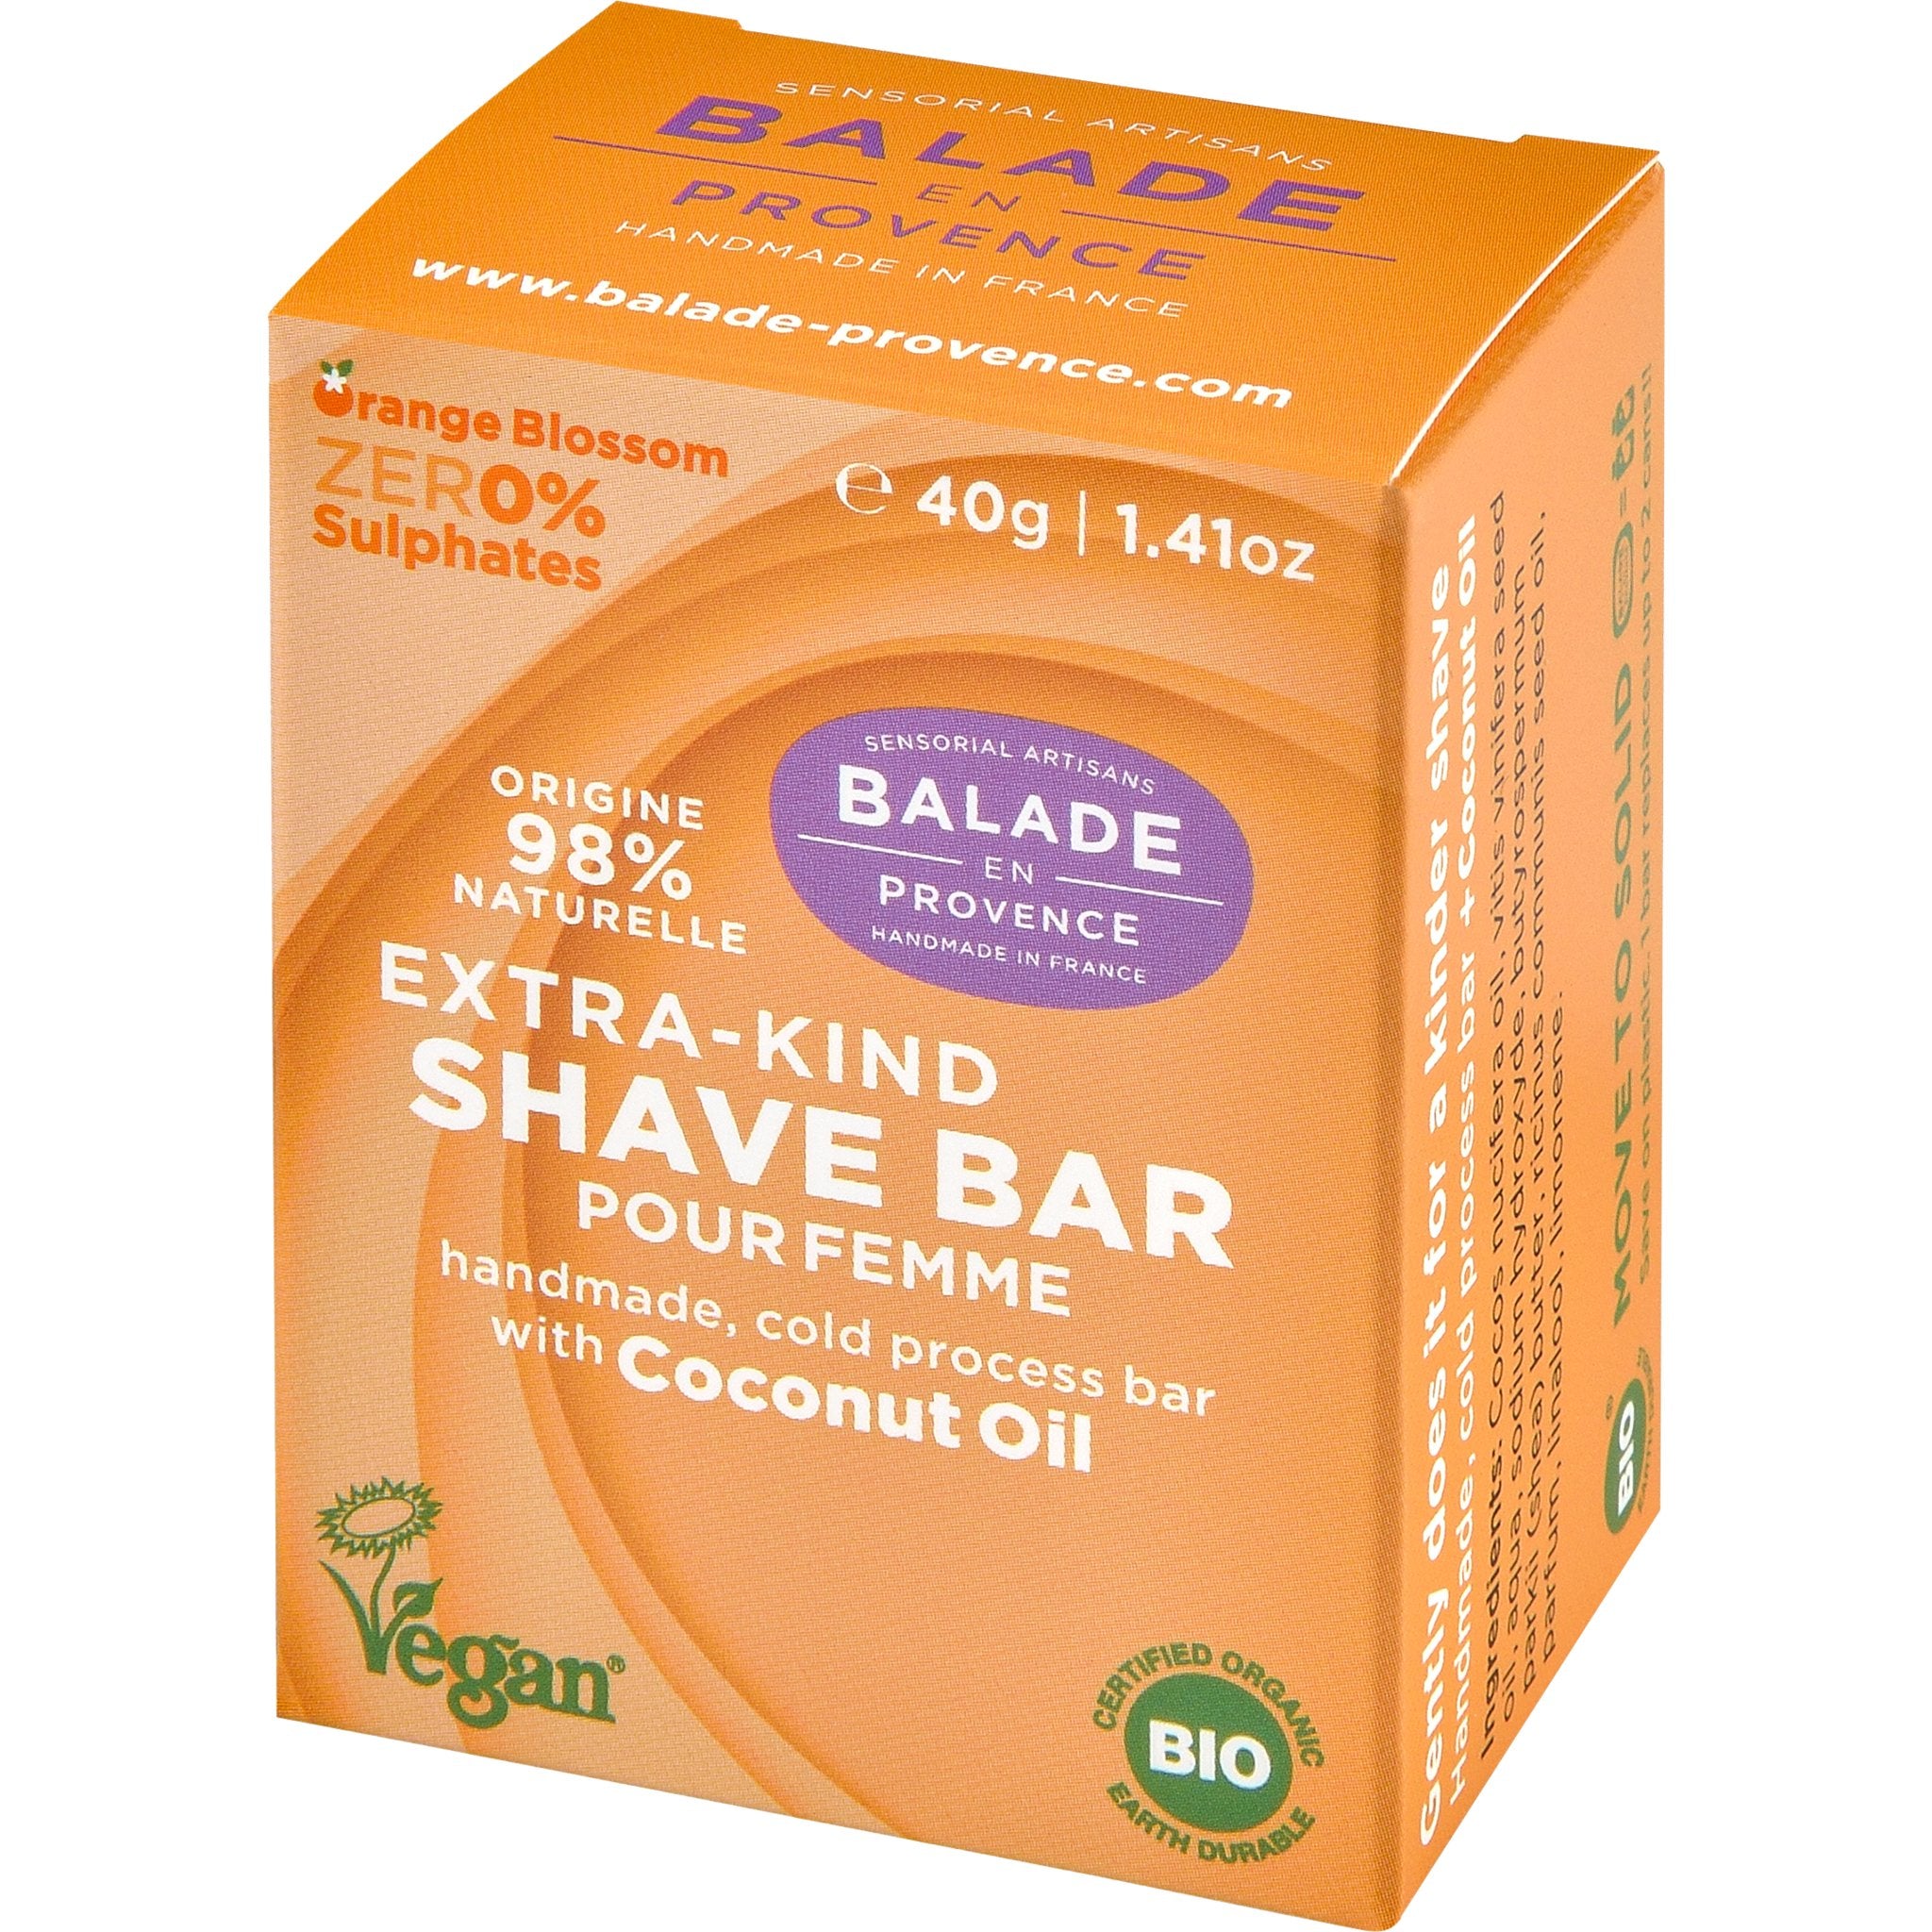 Solid Shave Bar | Extra-kind - mypure.co.uk